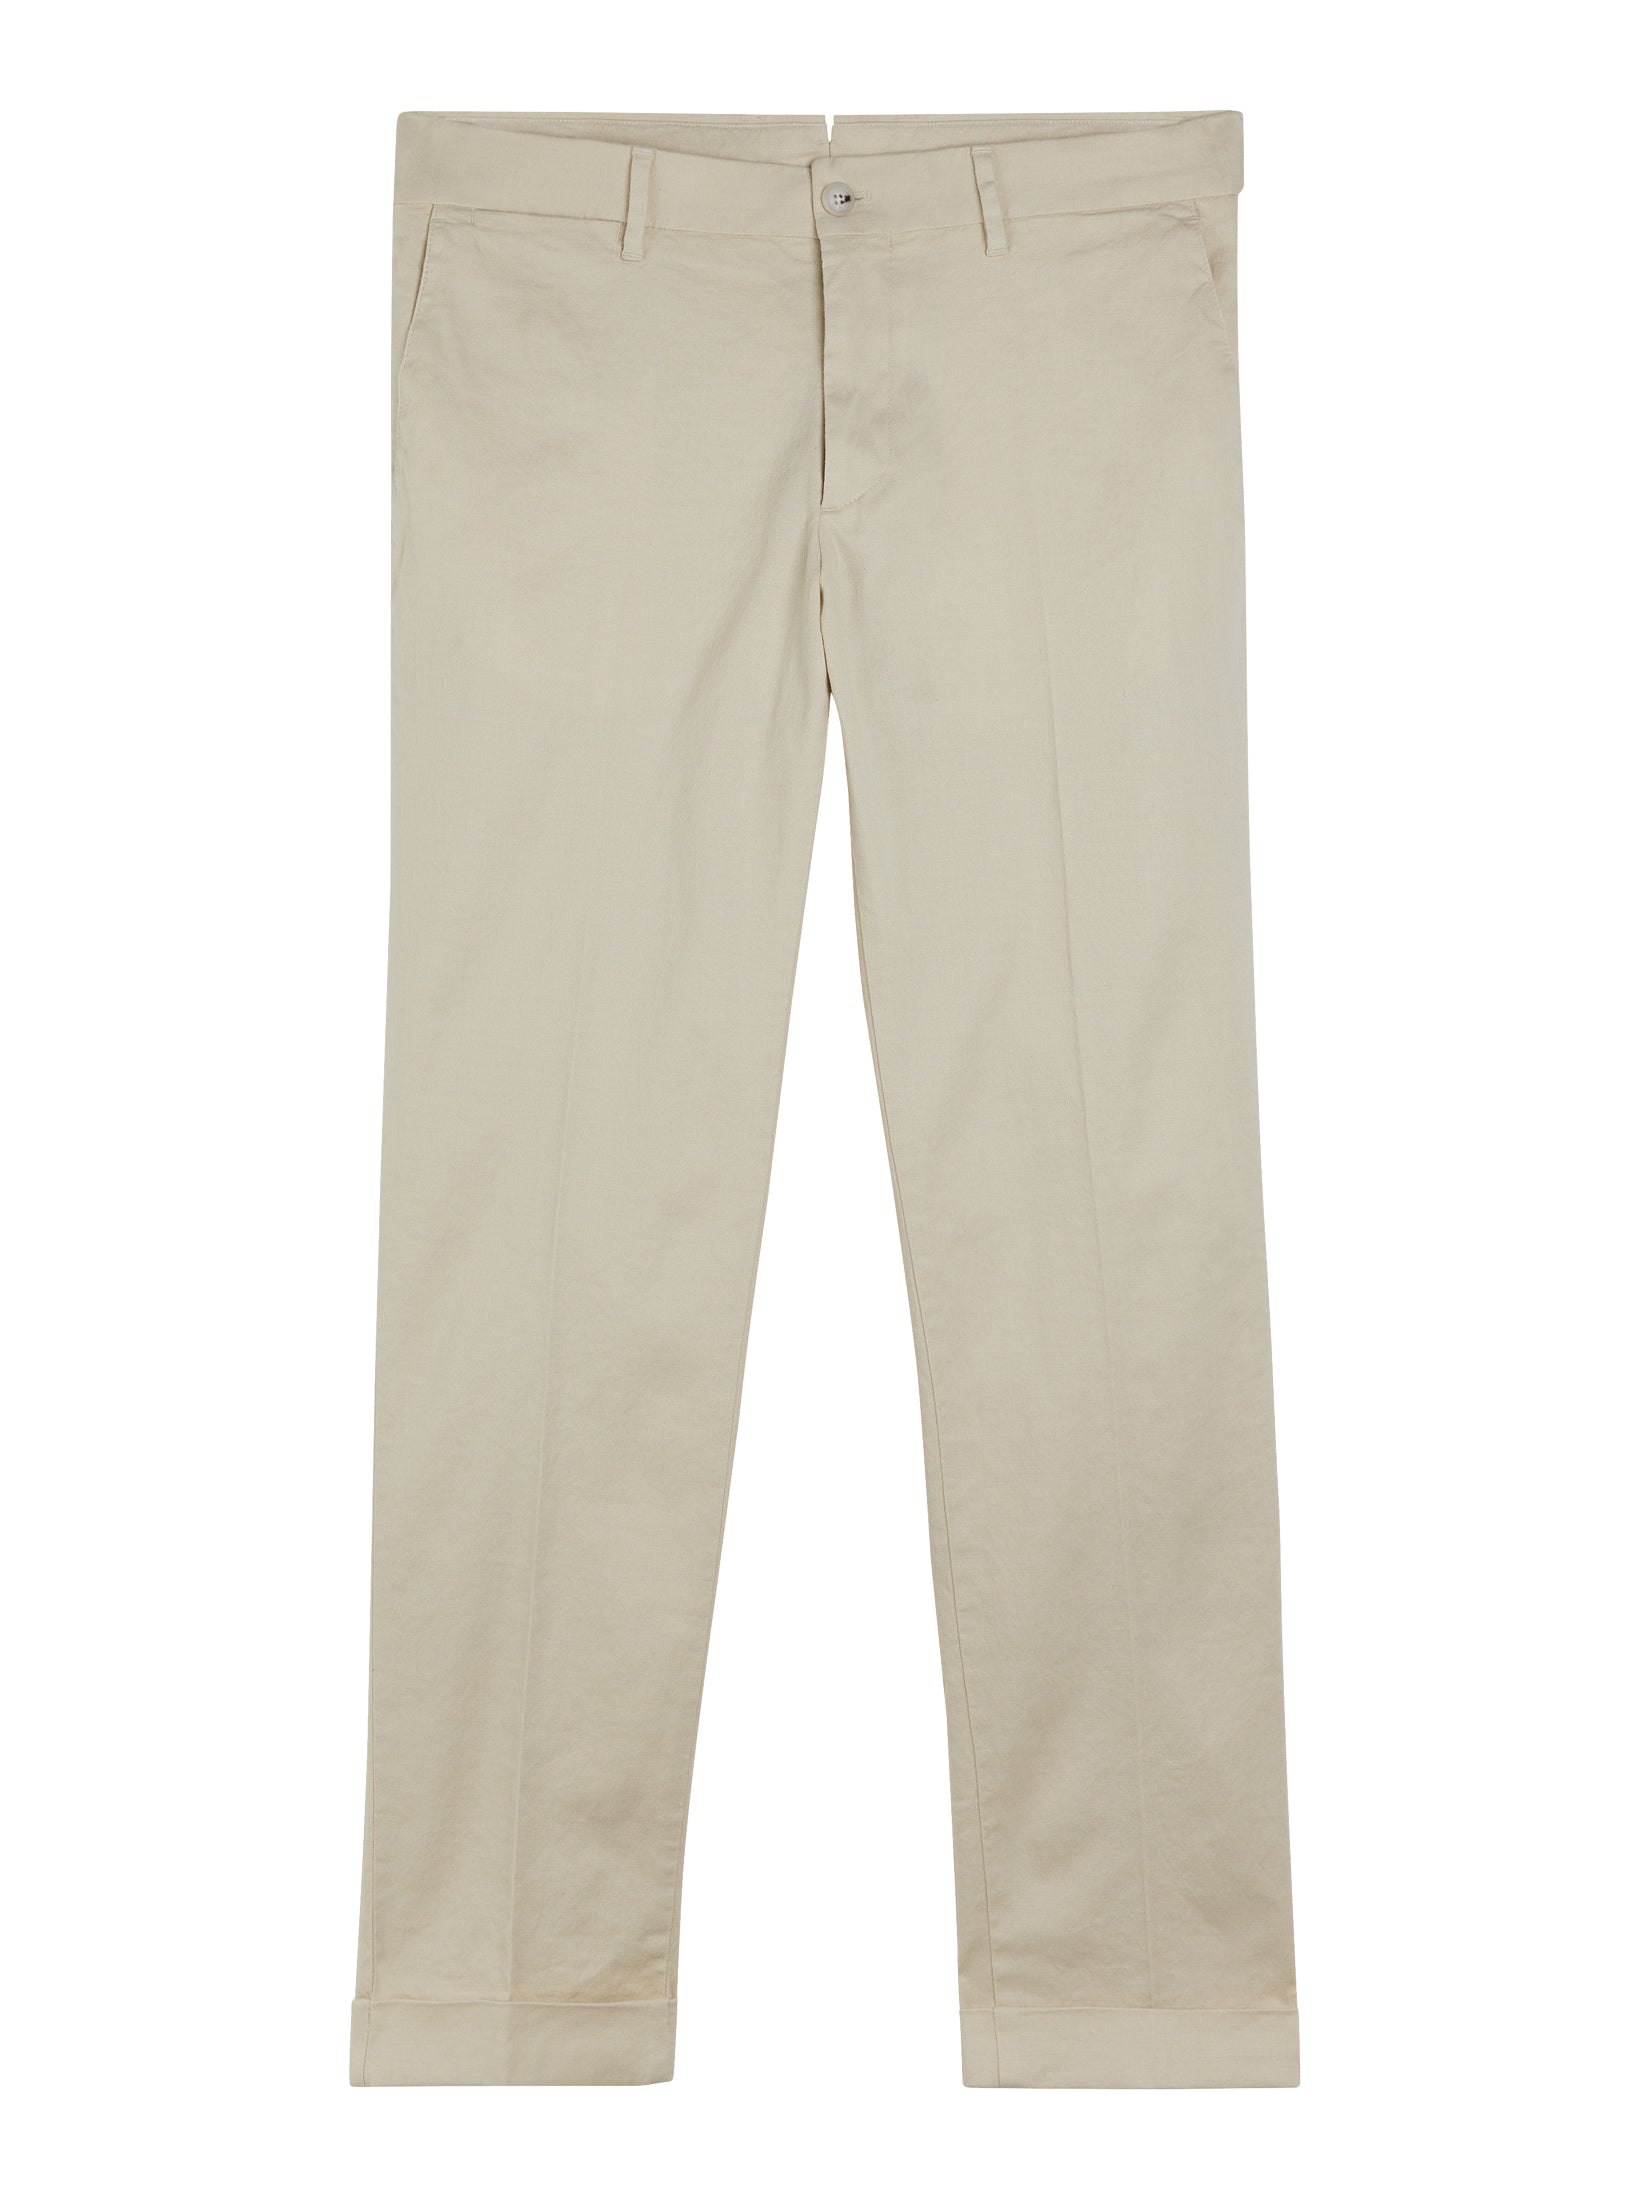 Mens Navy Stretch Chino Trousers | Primark